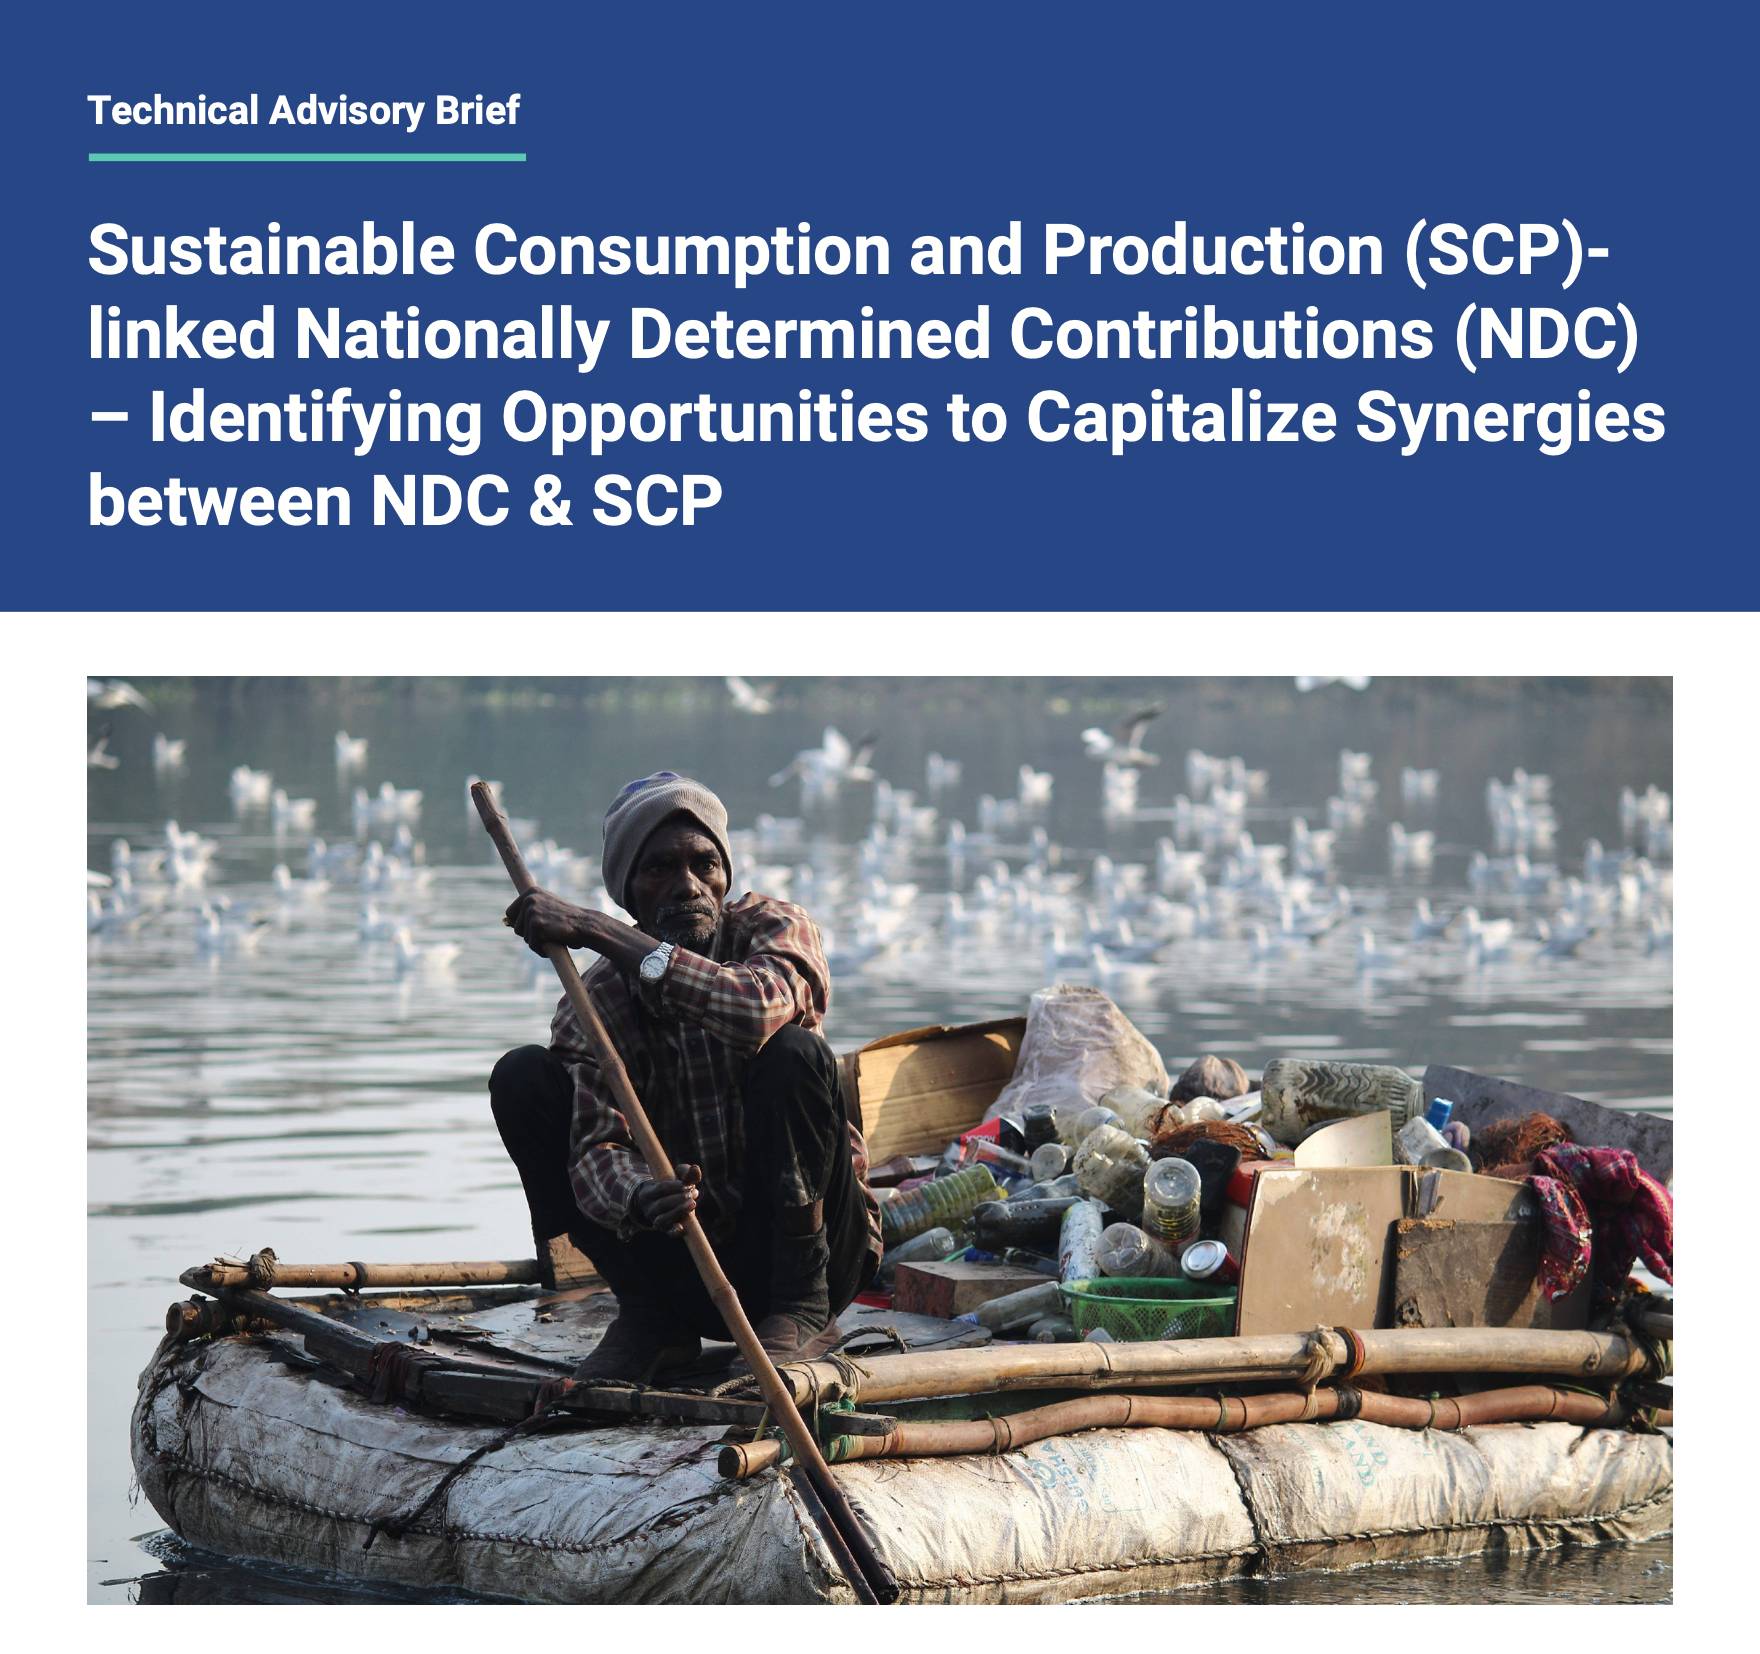 Sustainable Consumption and Production (SCP)- linked Nationally Determined Contributions (NDC)